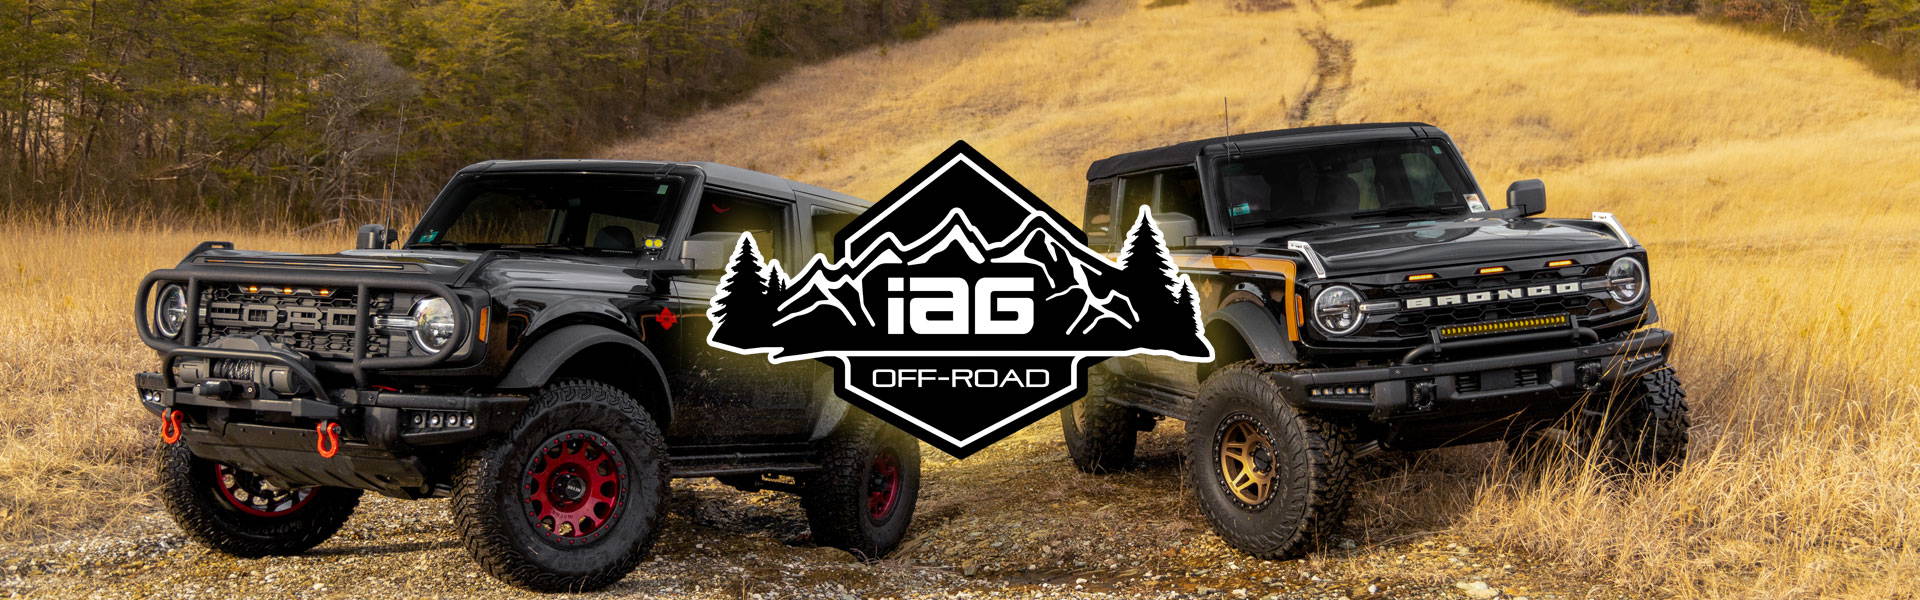 This page features a photo of two 2021+ Ford Broncos and has a text accordion that discusses aftermarket parts and accessories from IAG Off-Road.